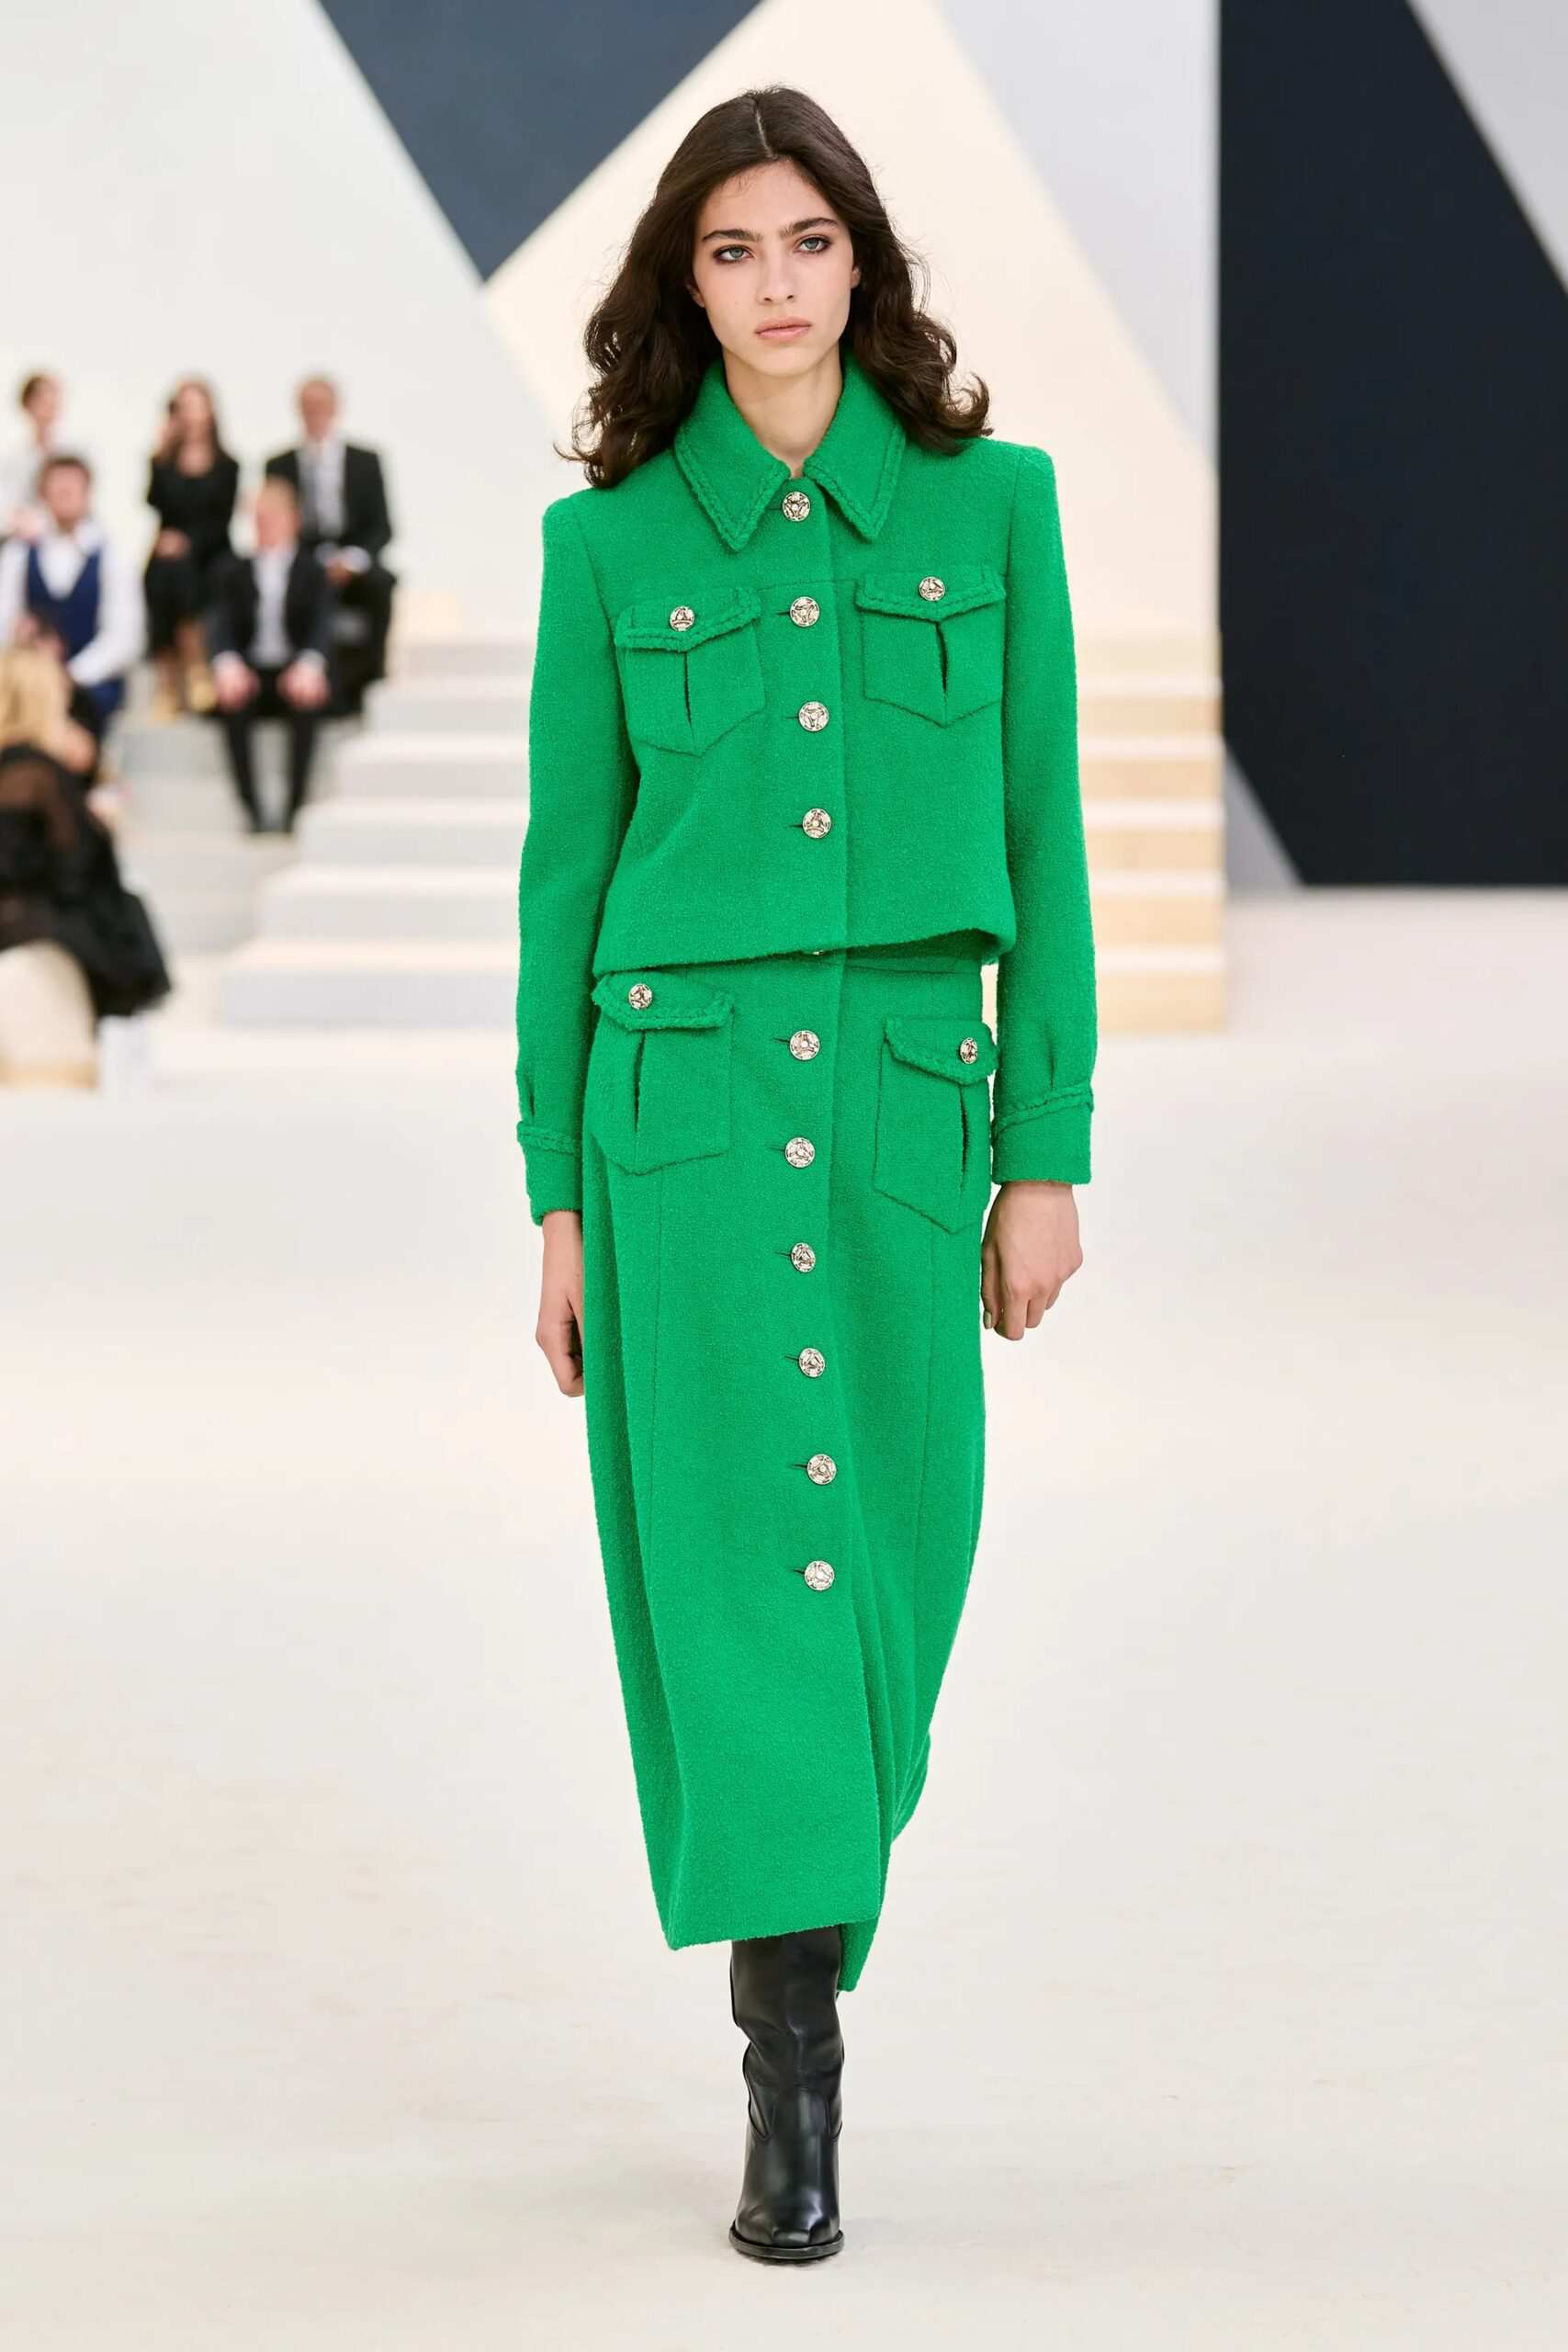 Chanel FallWinter 20222023 couture show